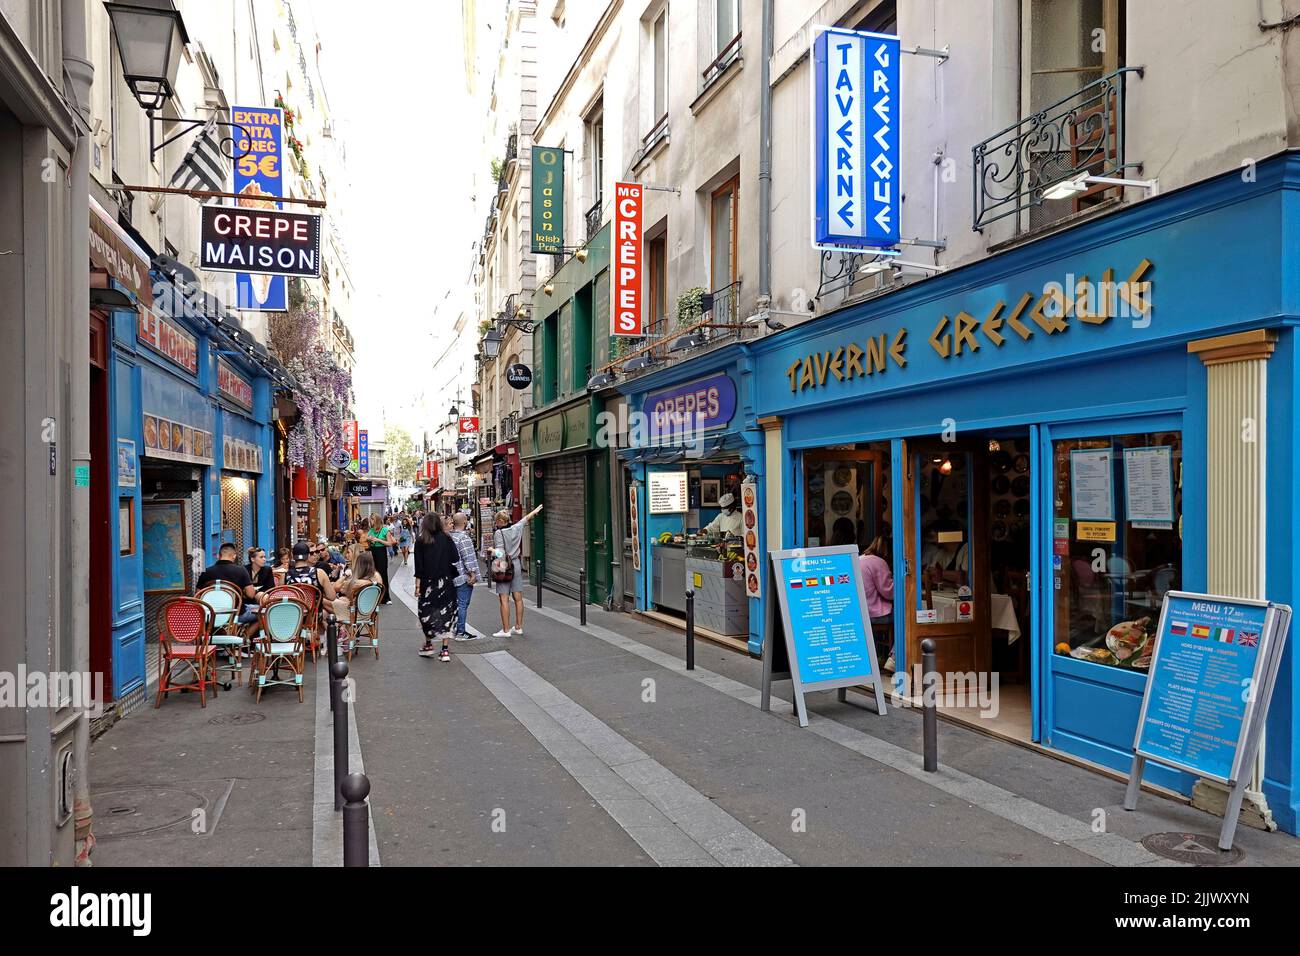 France Paris, Restaurants and eateries in the lively Rue de la Huchette, one of the oldest streets running along the Rive Gauche in Paris. Running eas Stock Photo